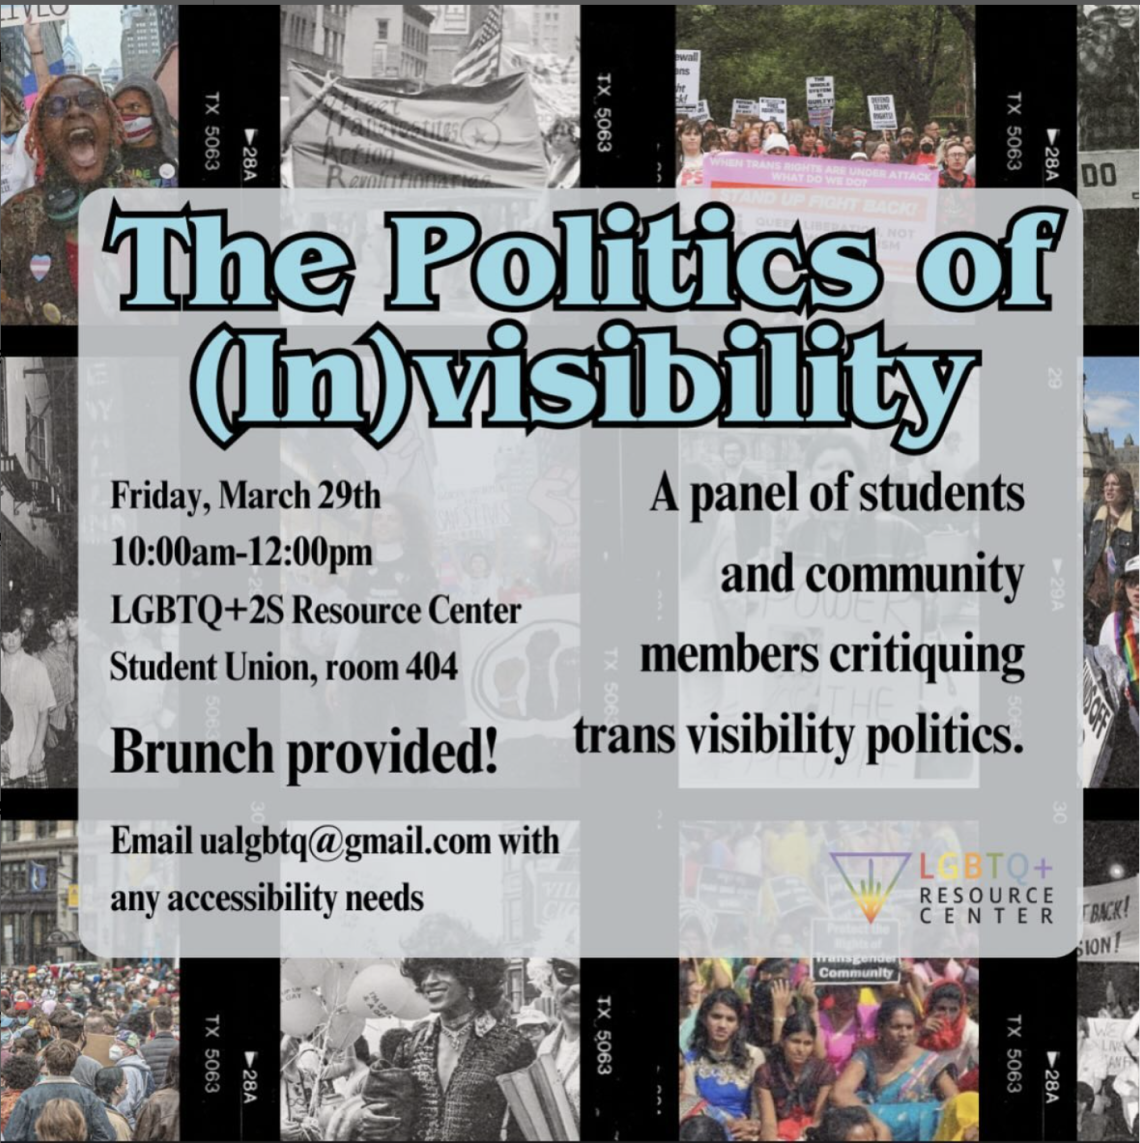 background has photos of different trans liberation rallies. foreground says “the politics of (in)visibility” in blue letters. underneath are event details: friday, march 29th. 10:00 am - 12:00 pm. lgbtq+2s resource center. student union, room 404. a panel of students and community members critiquing trans visibility politics. brunch provided! email ualgbtq@gmail.com with any accessibility needs.